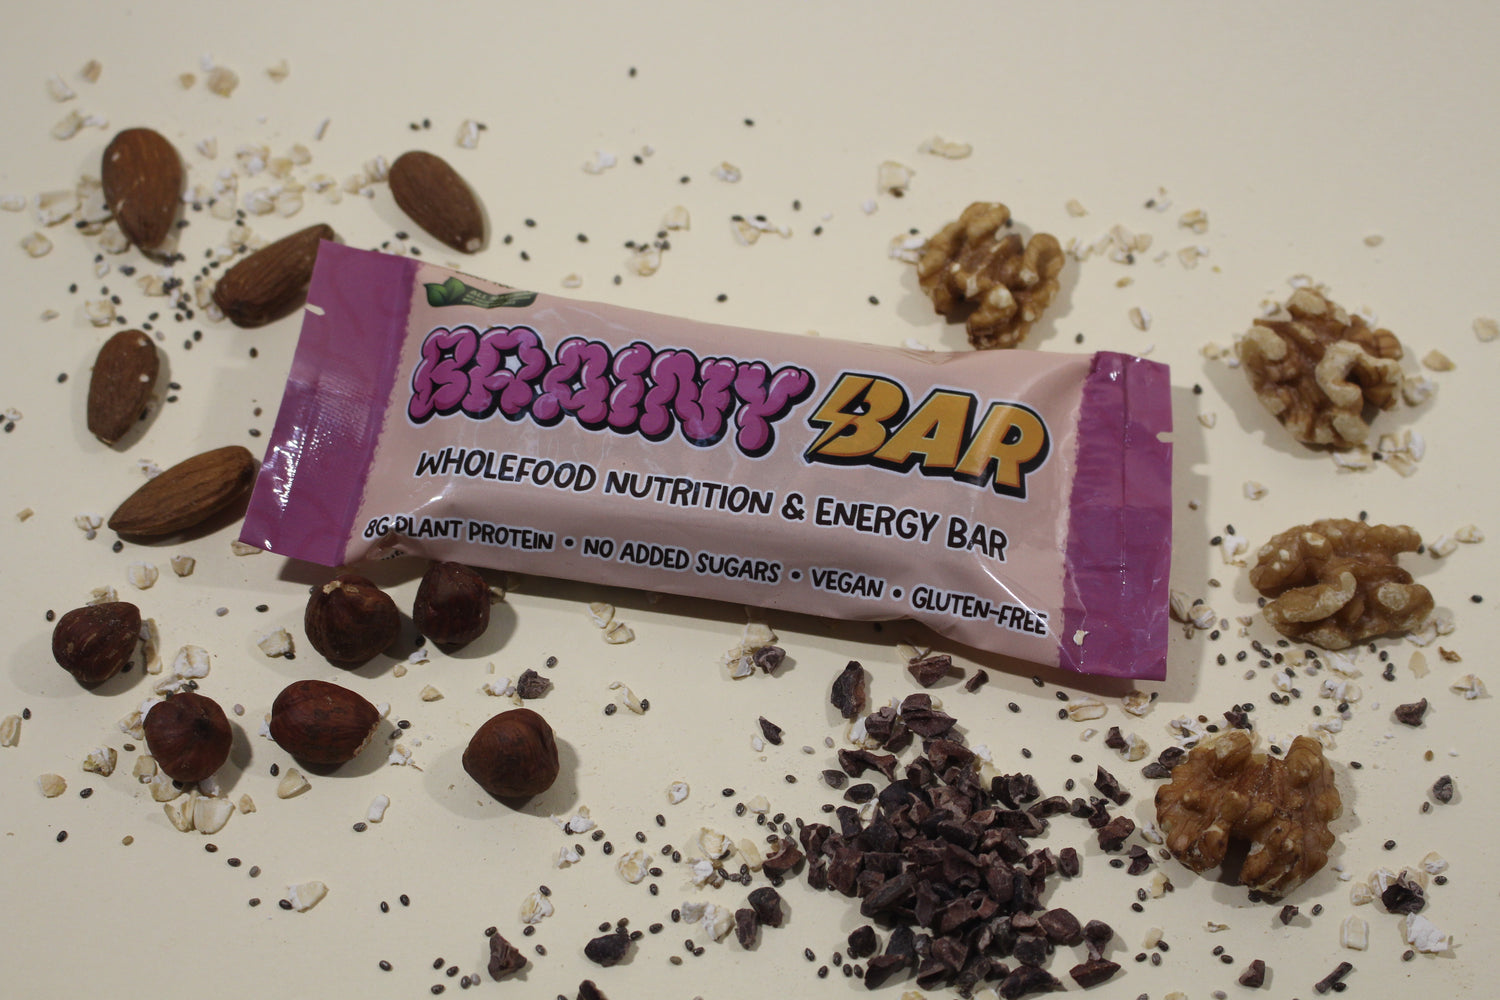 Brainy bar energy bar surrounded by ingredients